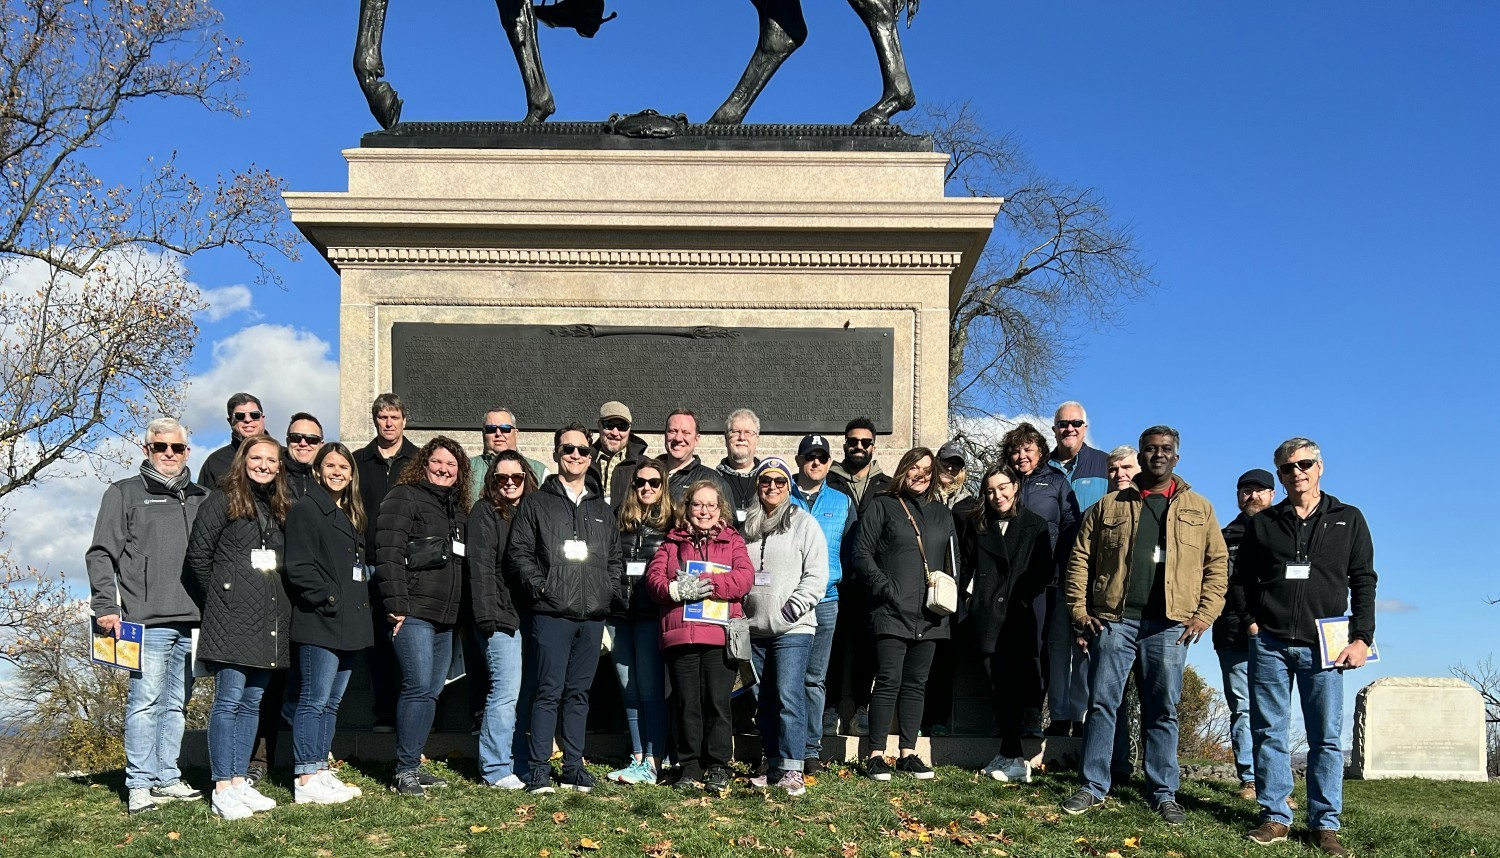 Investing in continued education of our leaders - Senior Leaders Course and Retreat in Gettysburg, PA.